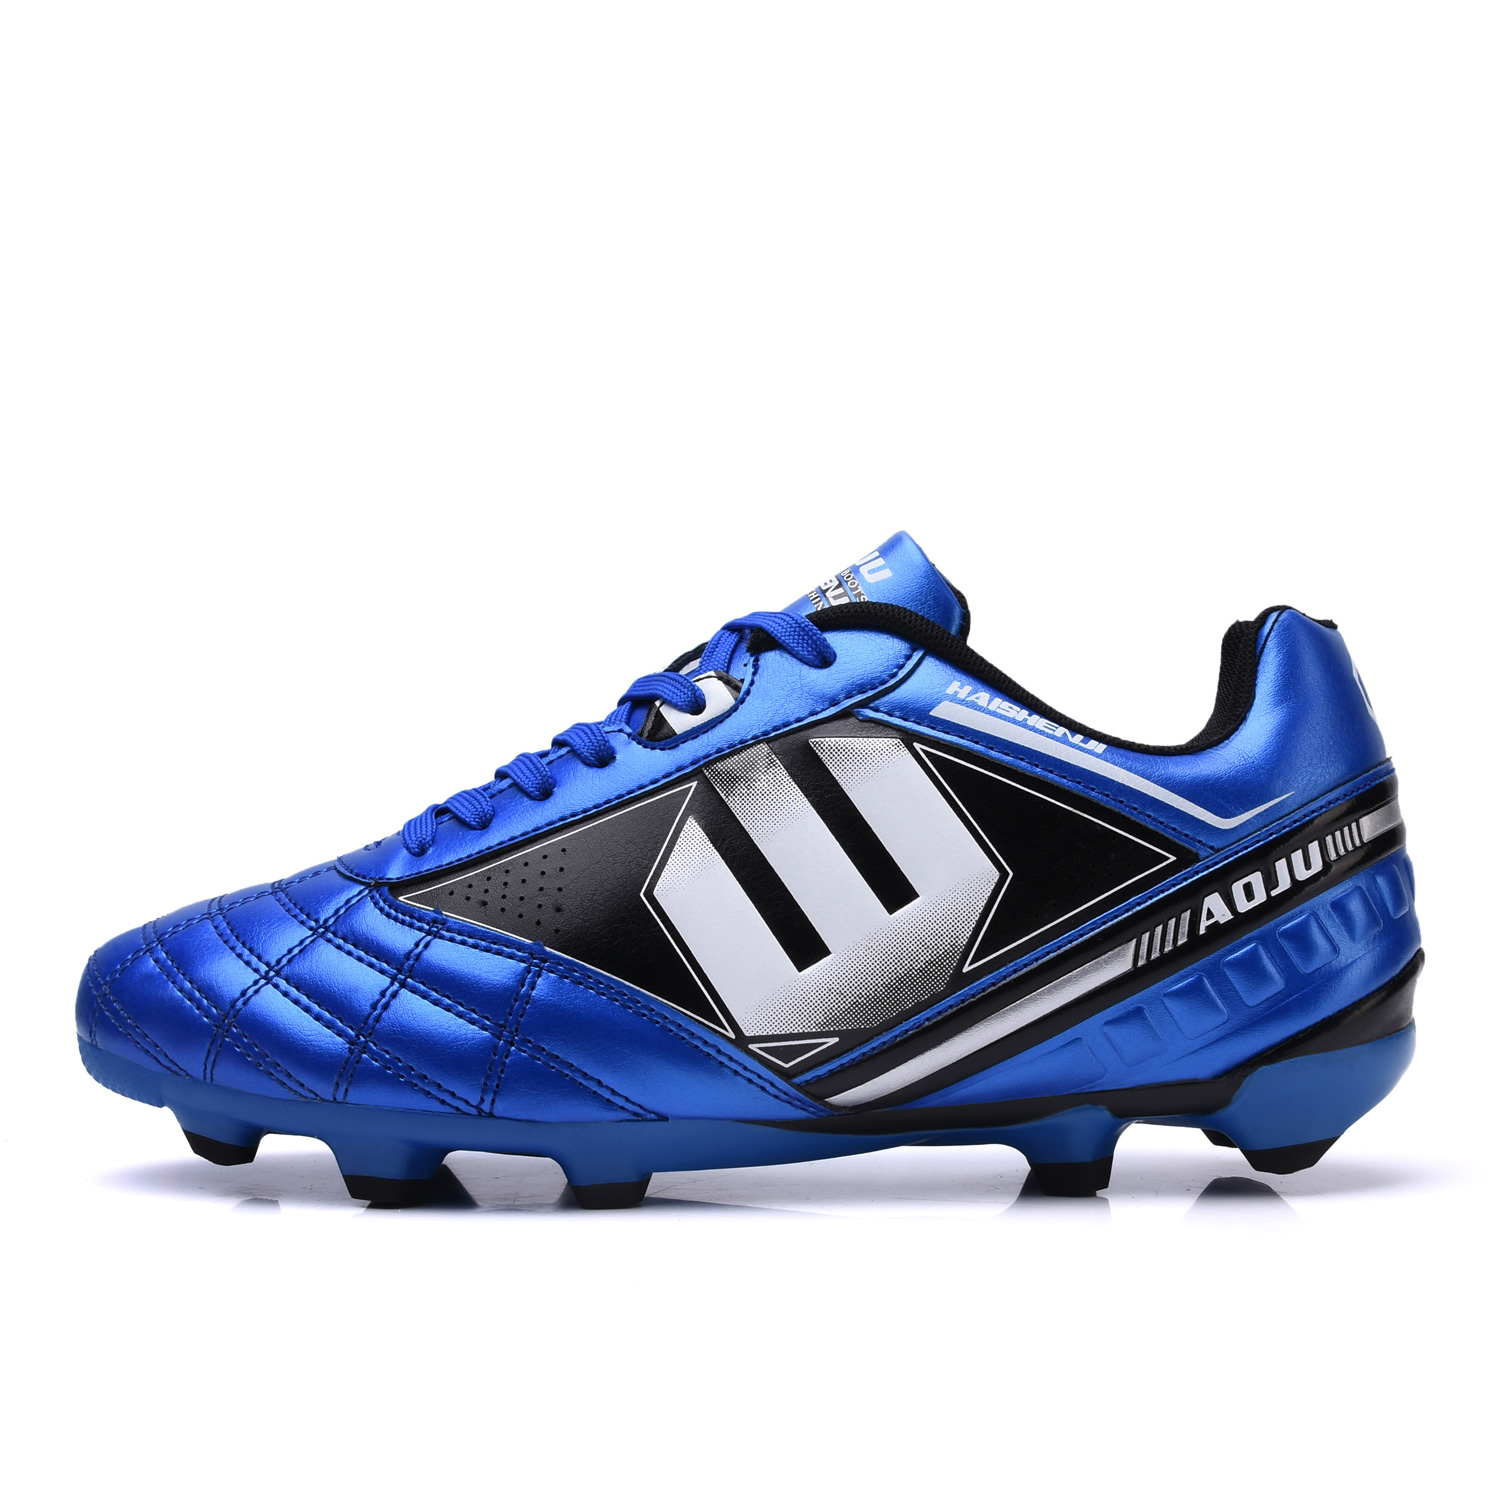 Soccer Cleats Boots Sneakers Football Shoes 2018 new Teenager Boy Hard Court Outdoor Sports Adult Training Turf Soccer Boot online